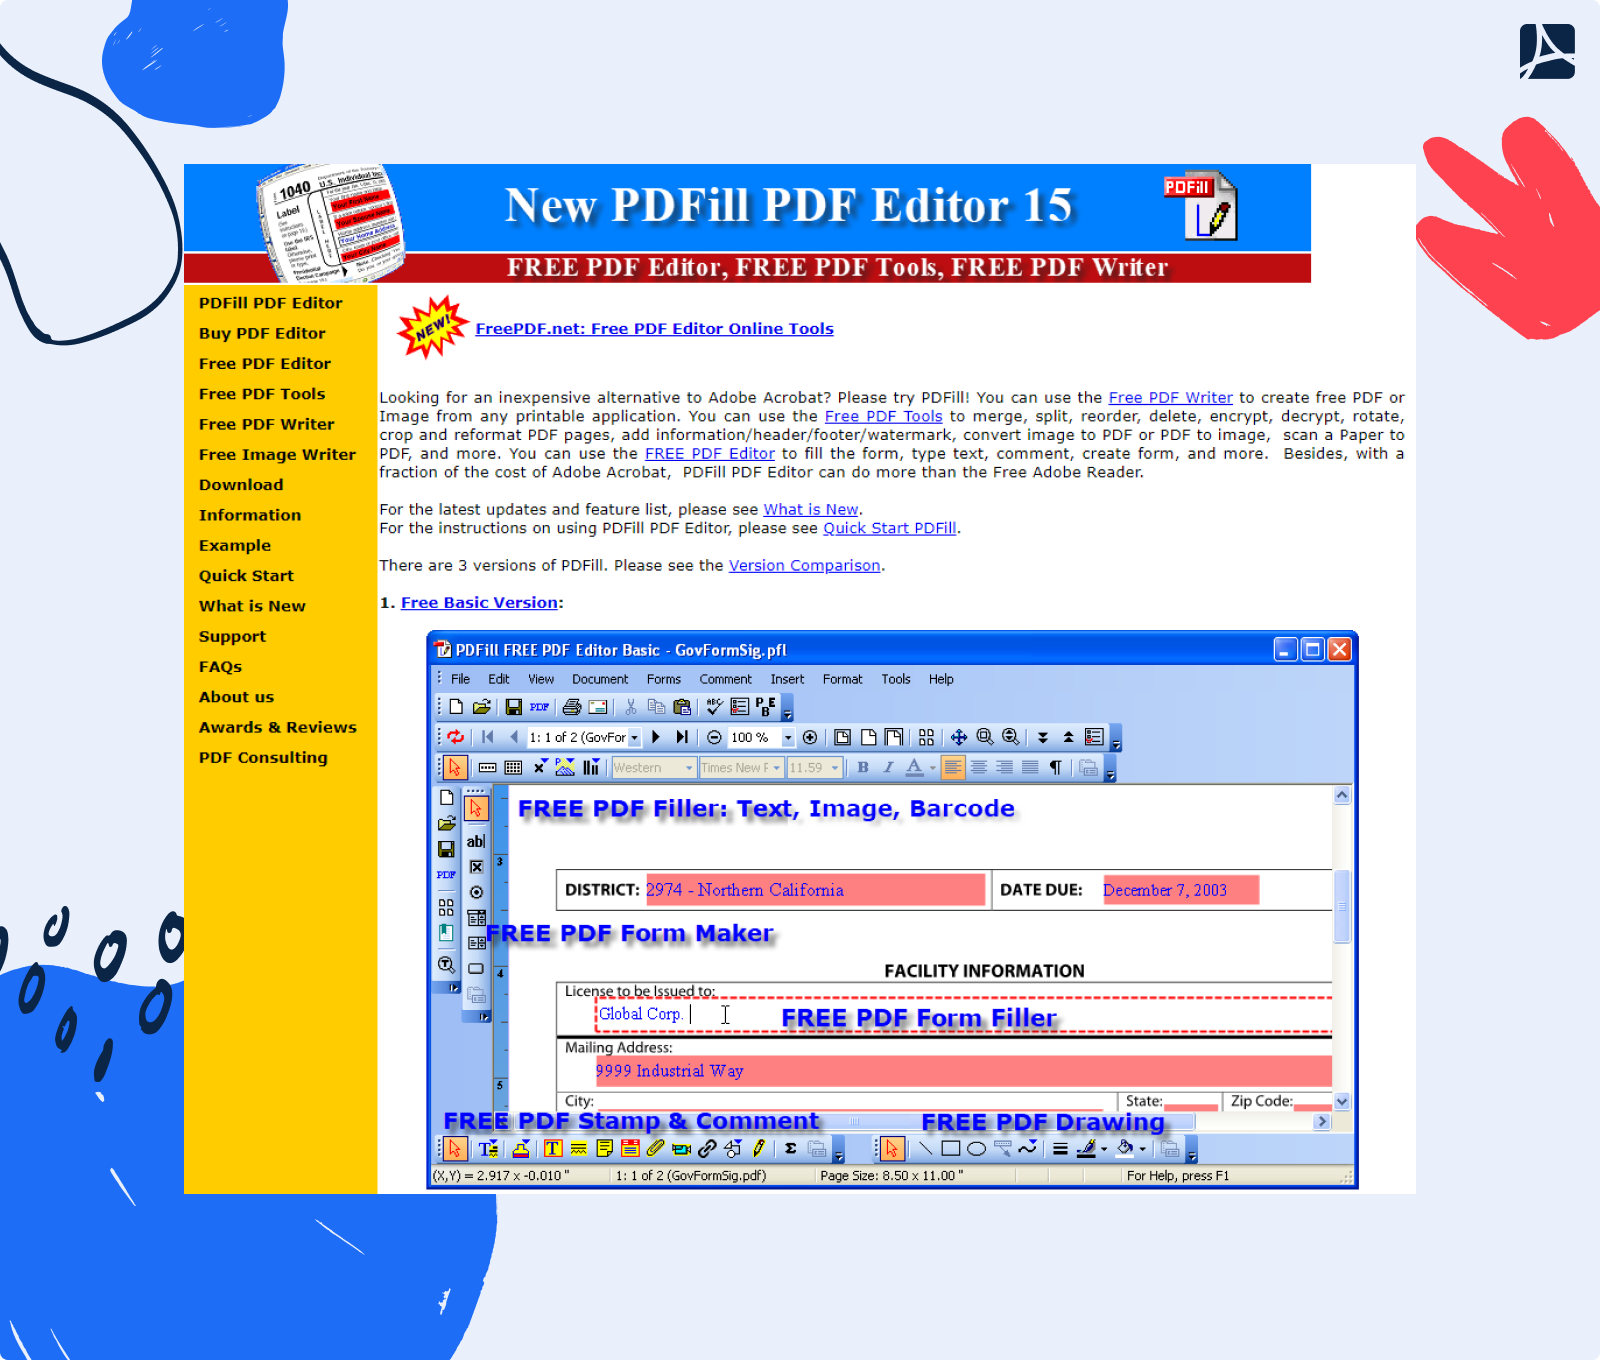 Main page of PDFill site